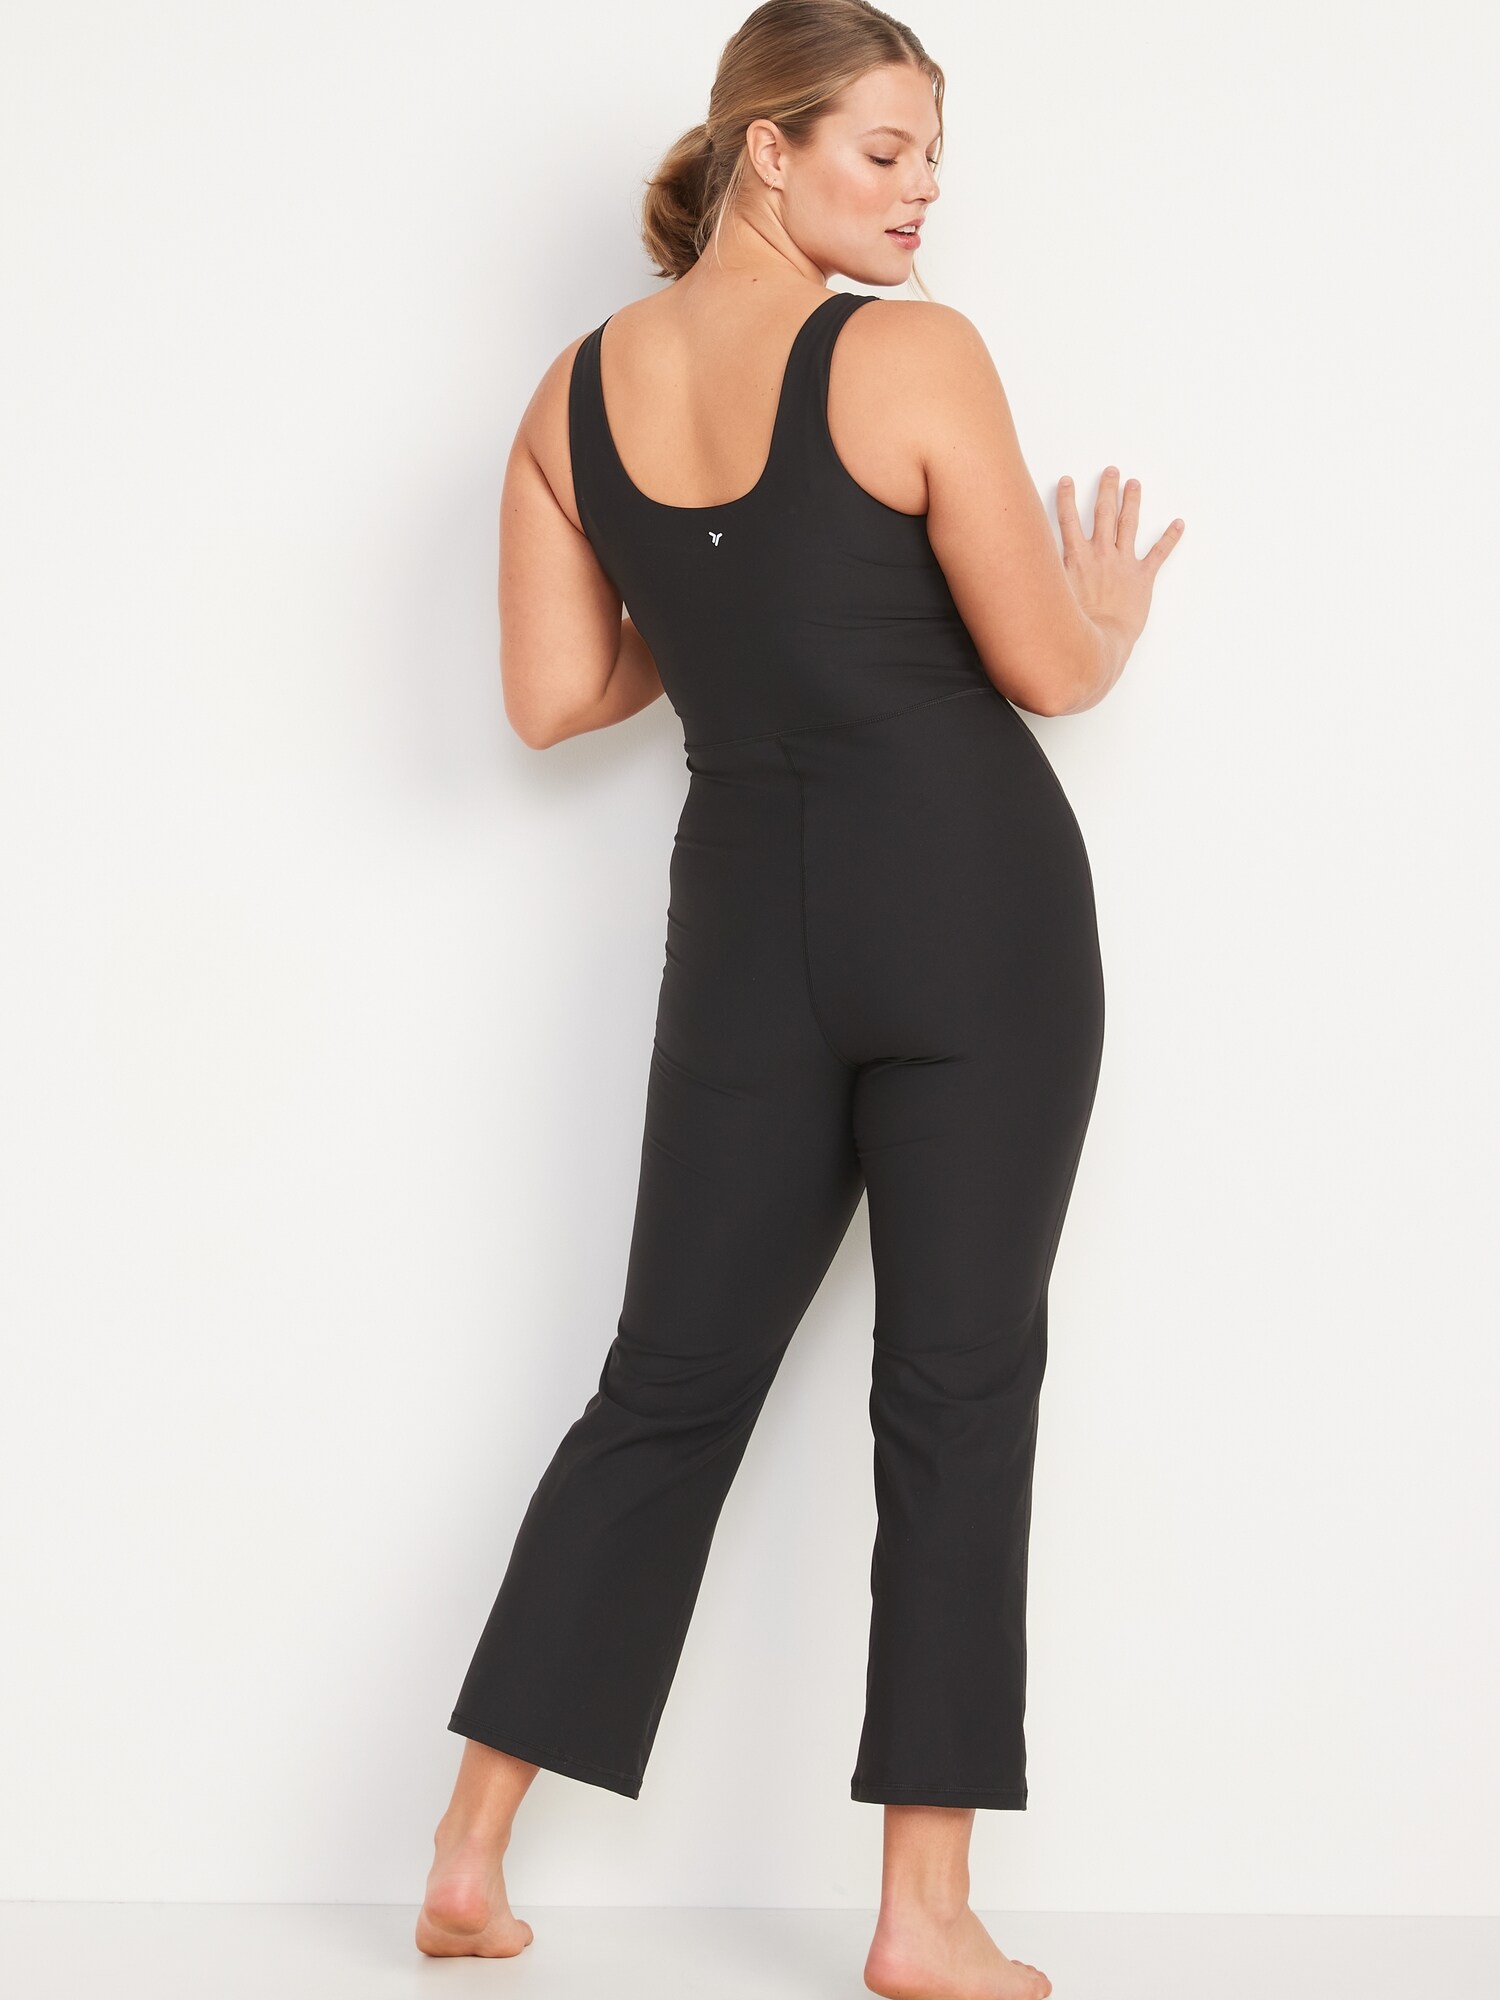 I'm 280 lbs & size XXL with a tummy - I found the perfect bodysuit for  tight sweater dresses, it sucks in my whole body